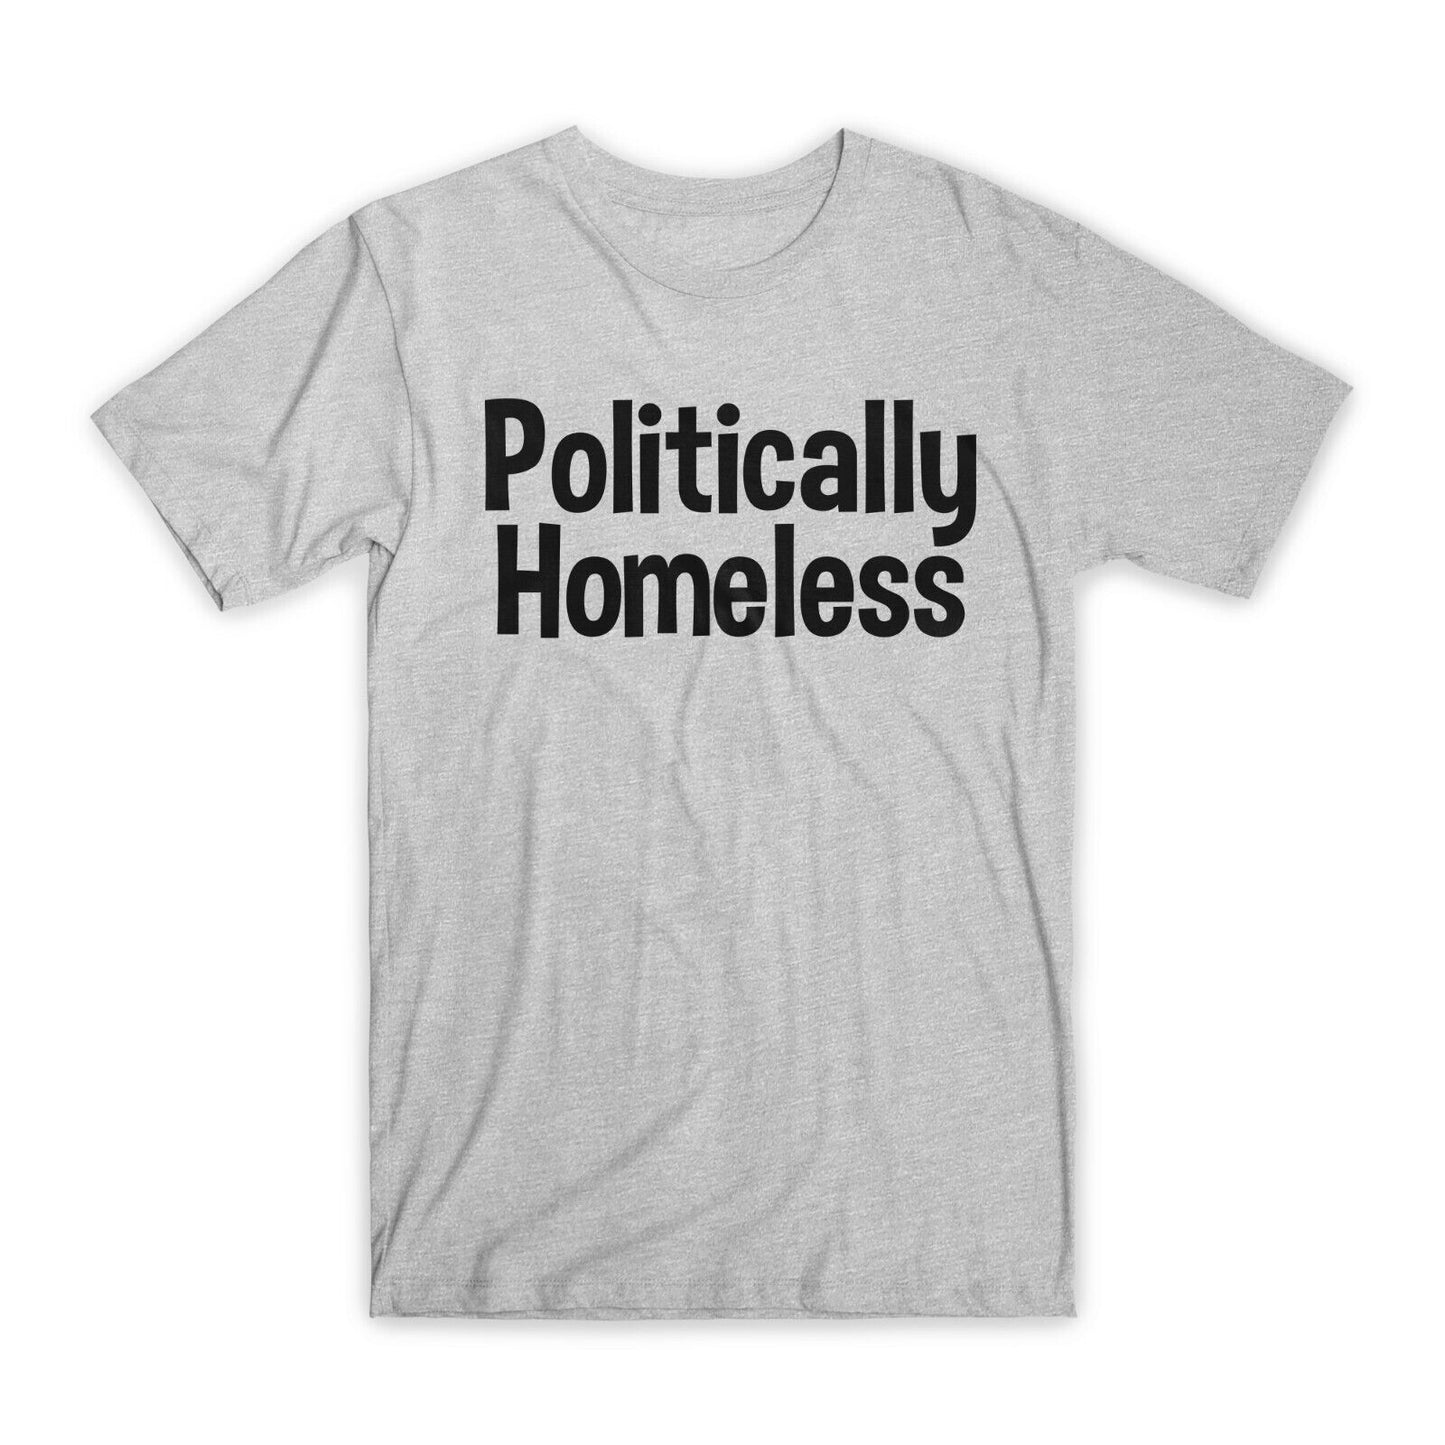 Politically Homeless T-Shirt Premium Soft Cotton Crew Neck Funny Tees Gifts NEW